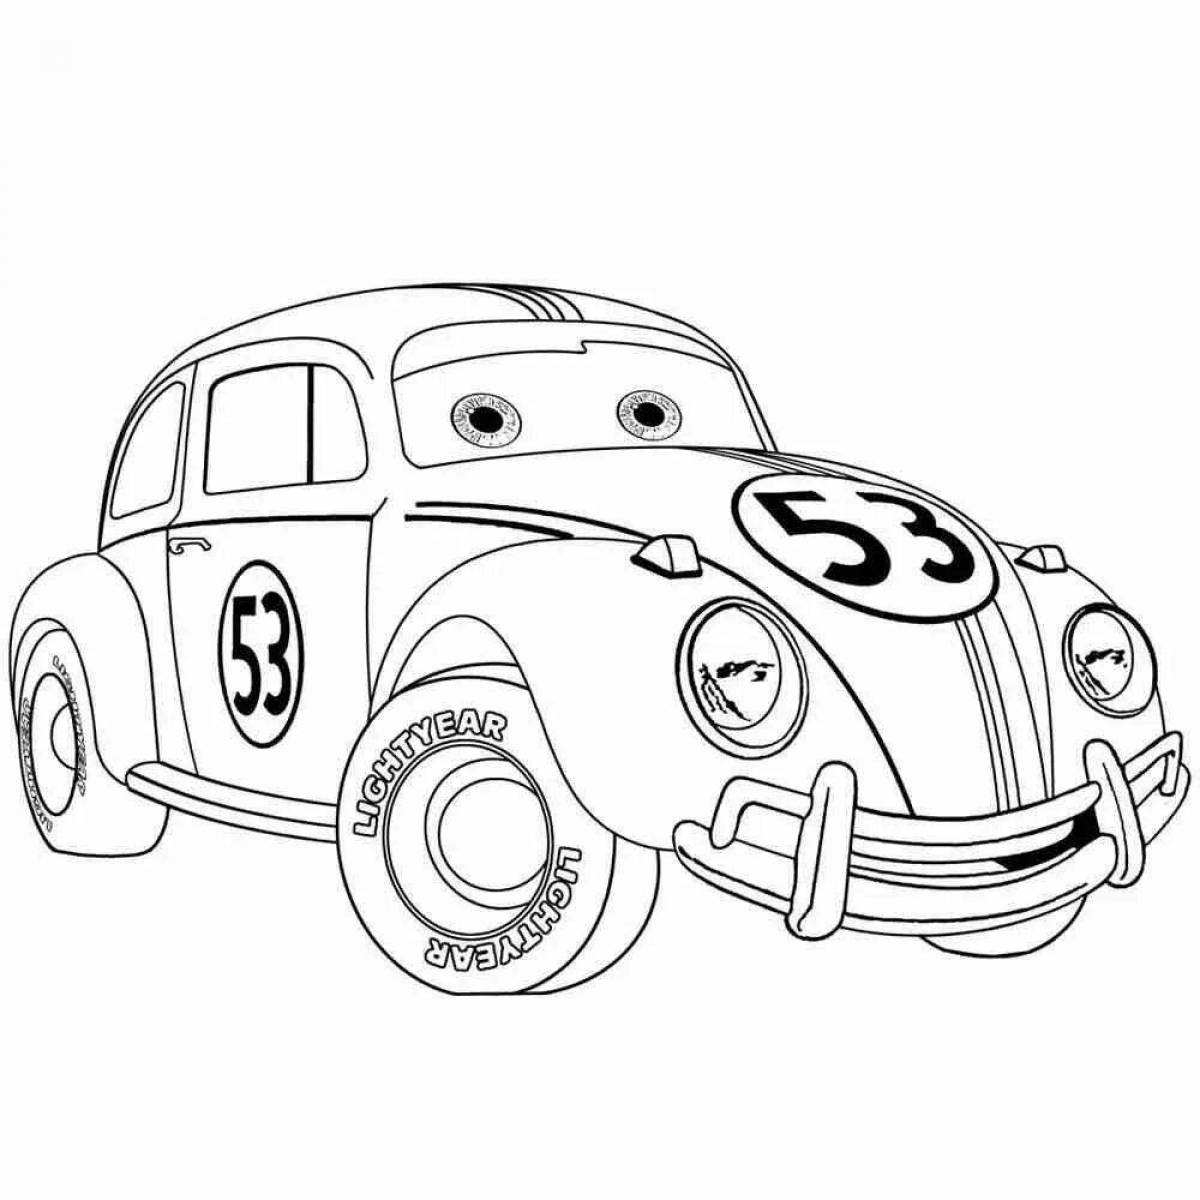 Colorful cartoon cars coloring for kids